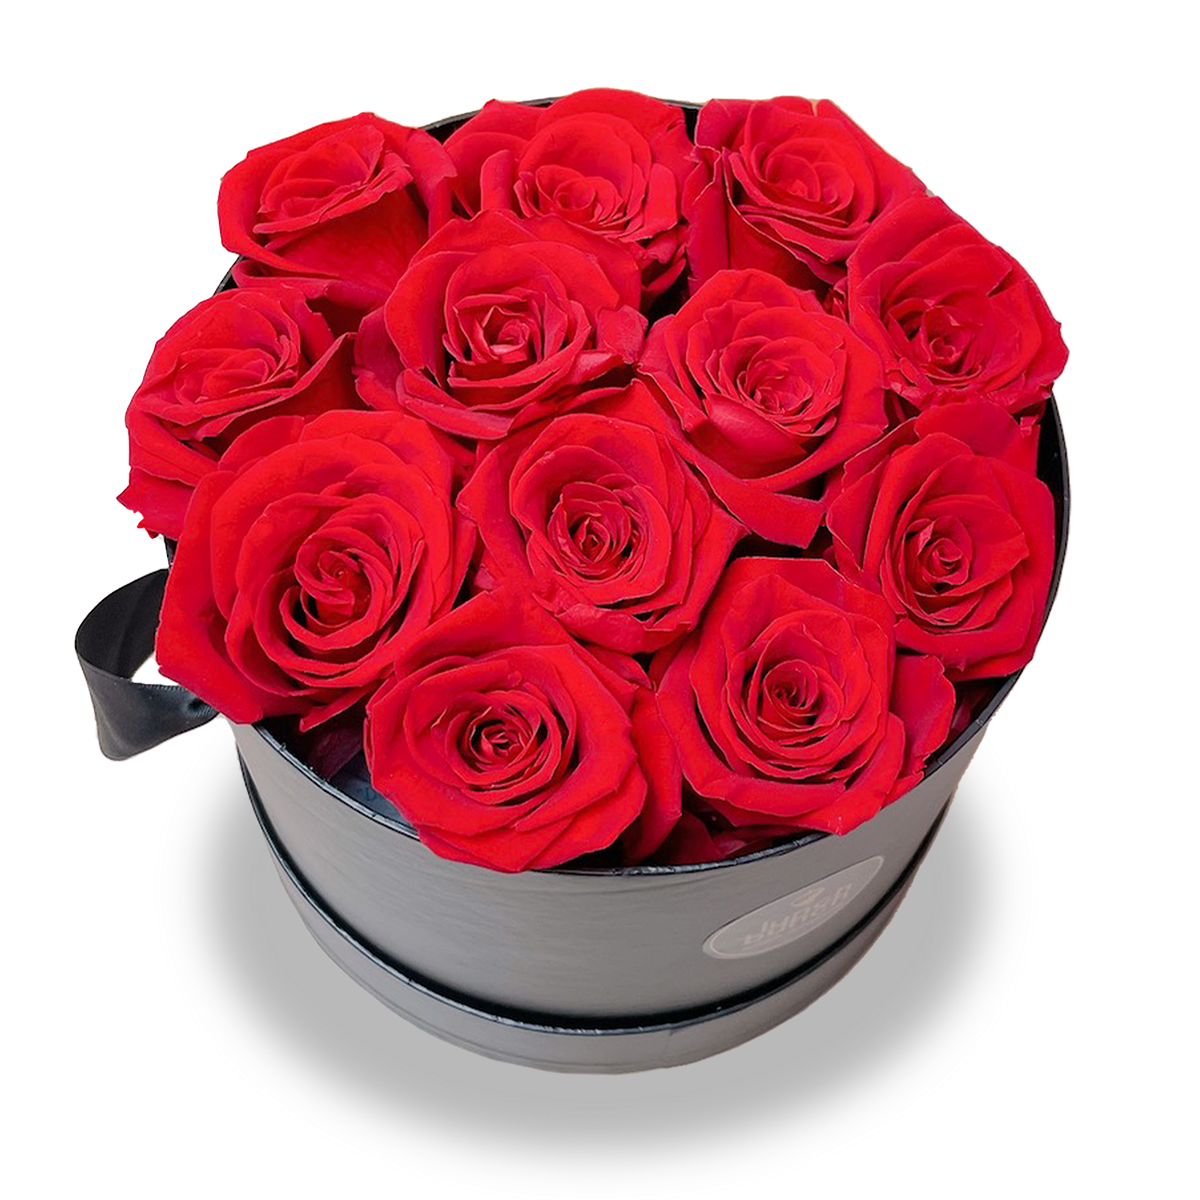 preserved roses, preserved flowers, preserved flower arrangements, preserved flowers bouquets, rose bouquet, everlasting rose bouquet,  long-lasting flowers, luxury roses, luxury preserved roses, luxury preserved rose, luxury roses, romantic gift, romantic gifts for her, romantic gifts for him, ideal gift for mom, gift for mom, gift for girlfriend, gift for wife